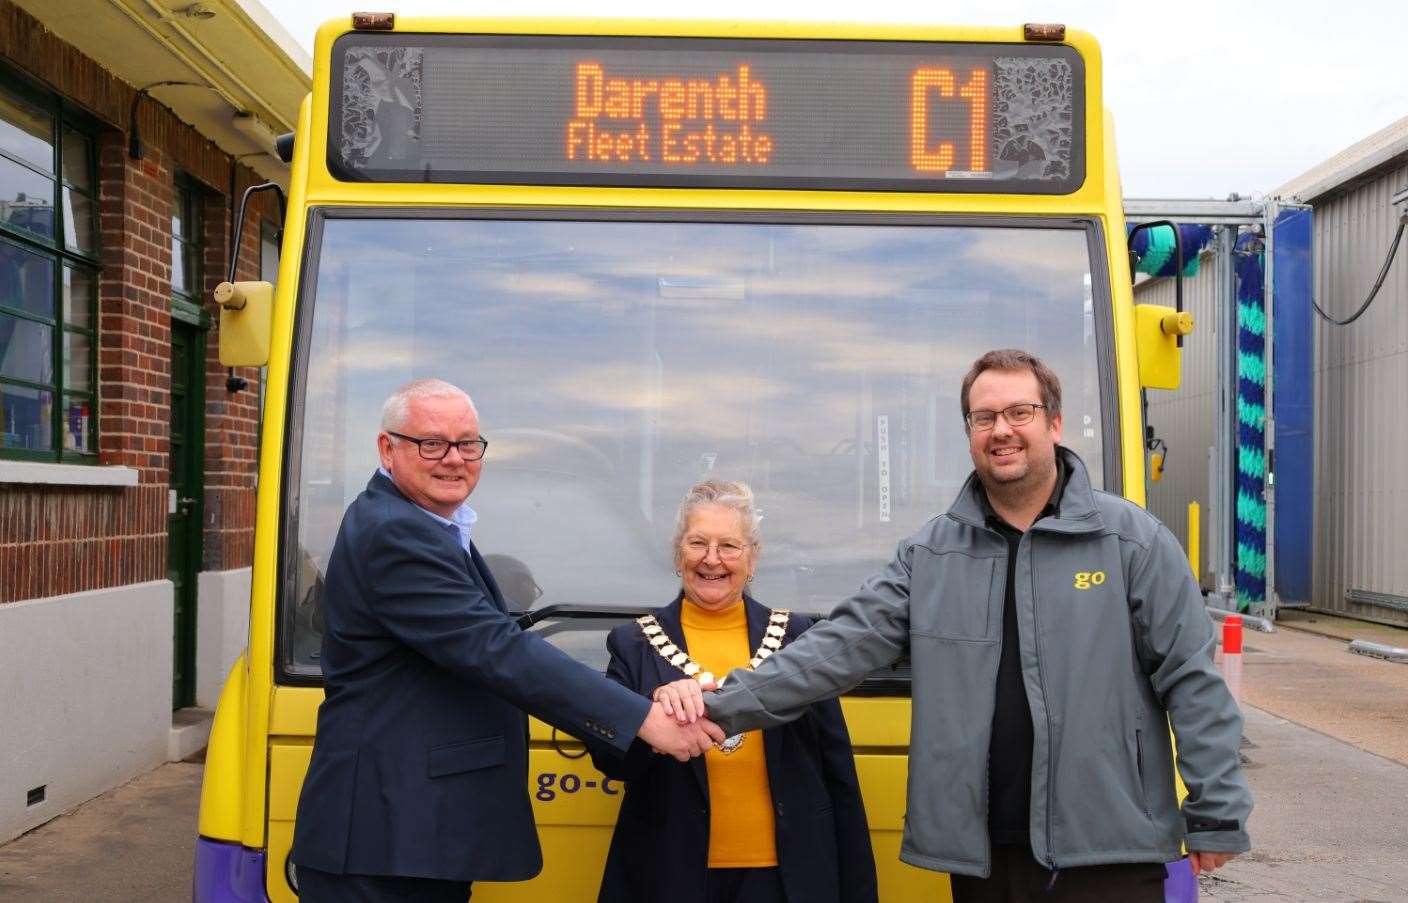 The Connect 1 bus service is being extended. Photo credit: Dartford Borough Council